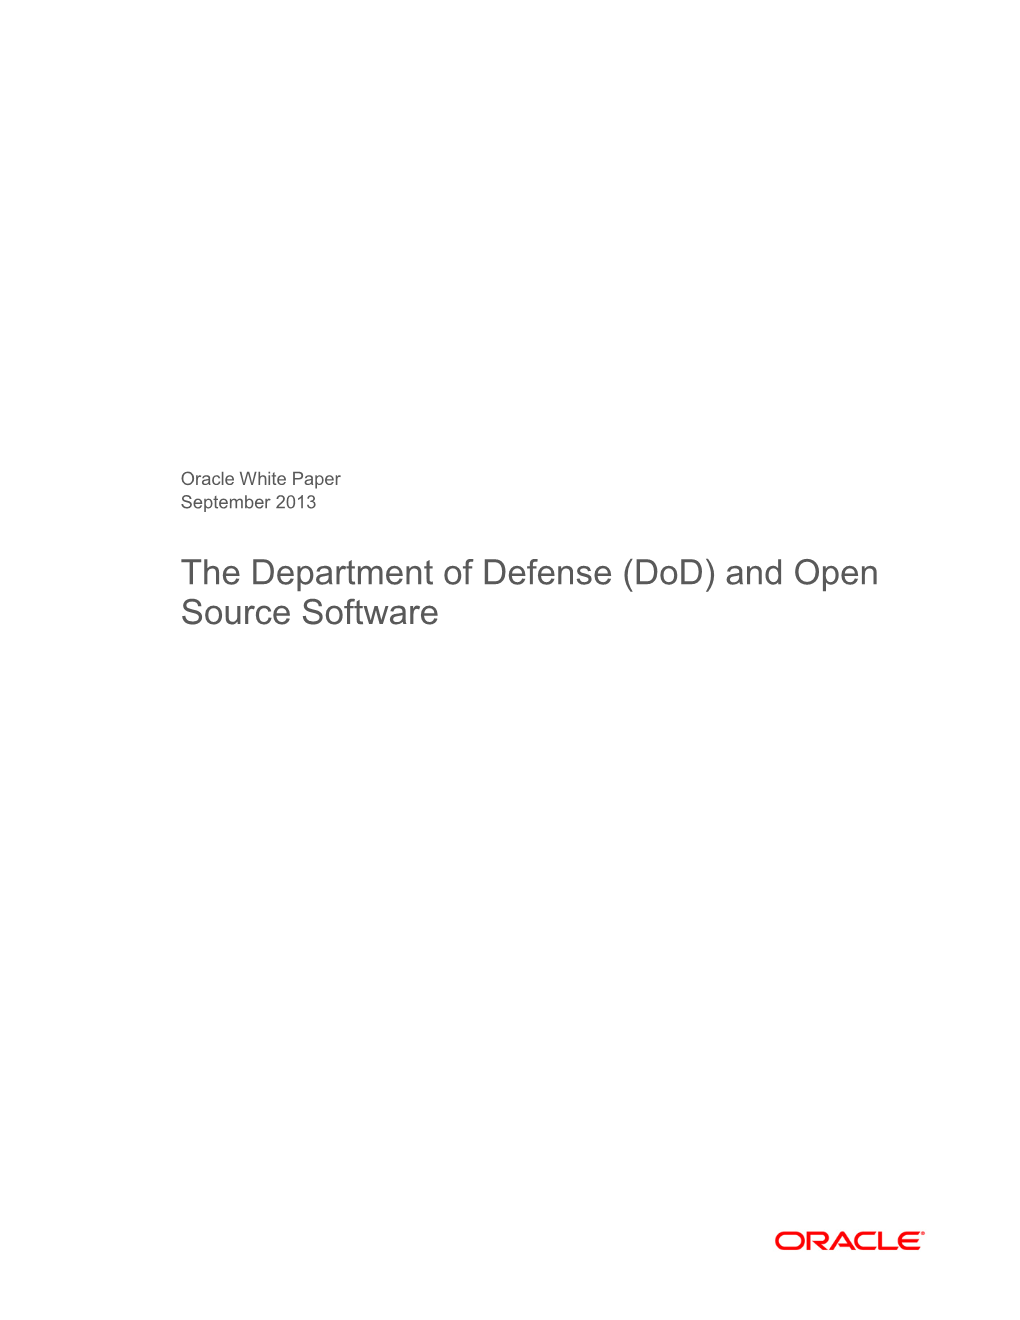 The Department of Defense (Dod) and Open Source Software